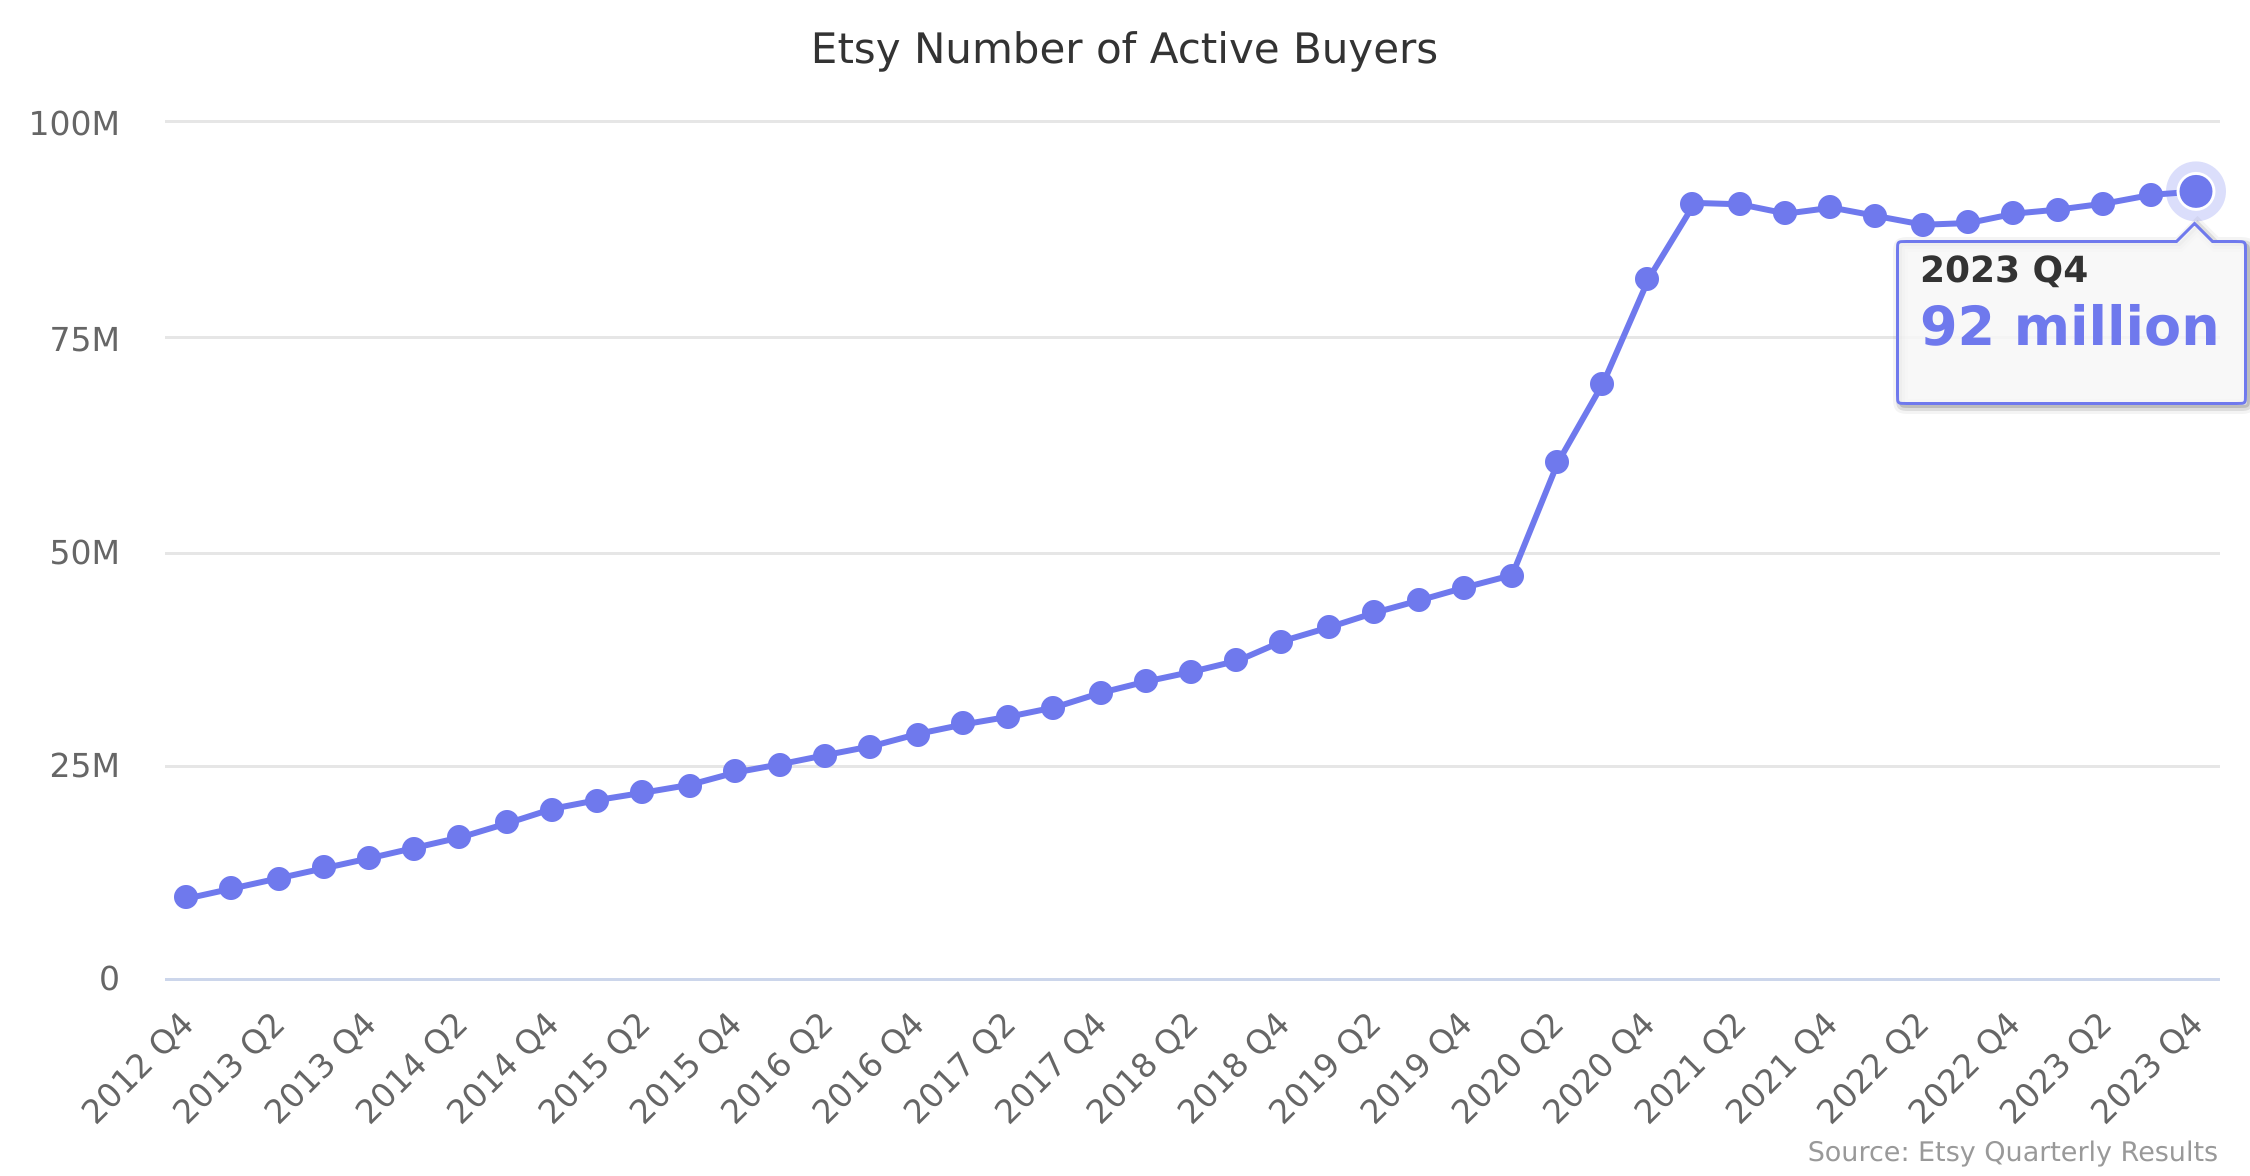 Etsy Number of Active Buyers 2012-2022